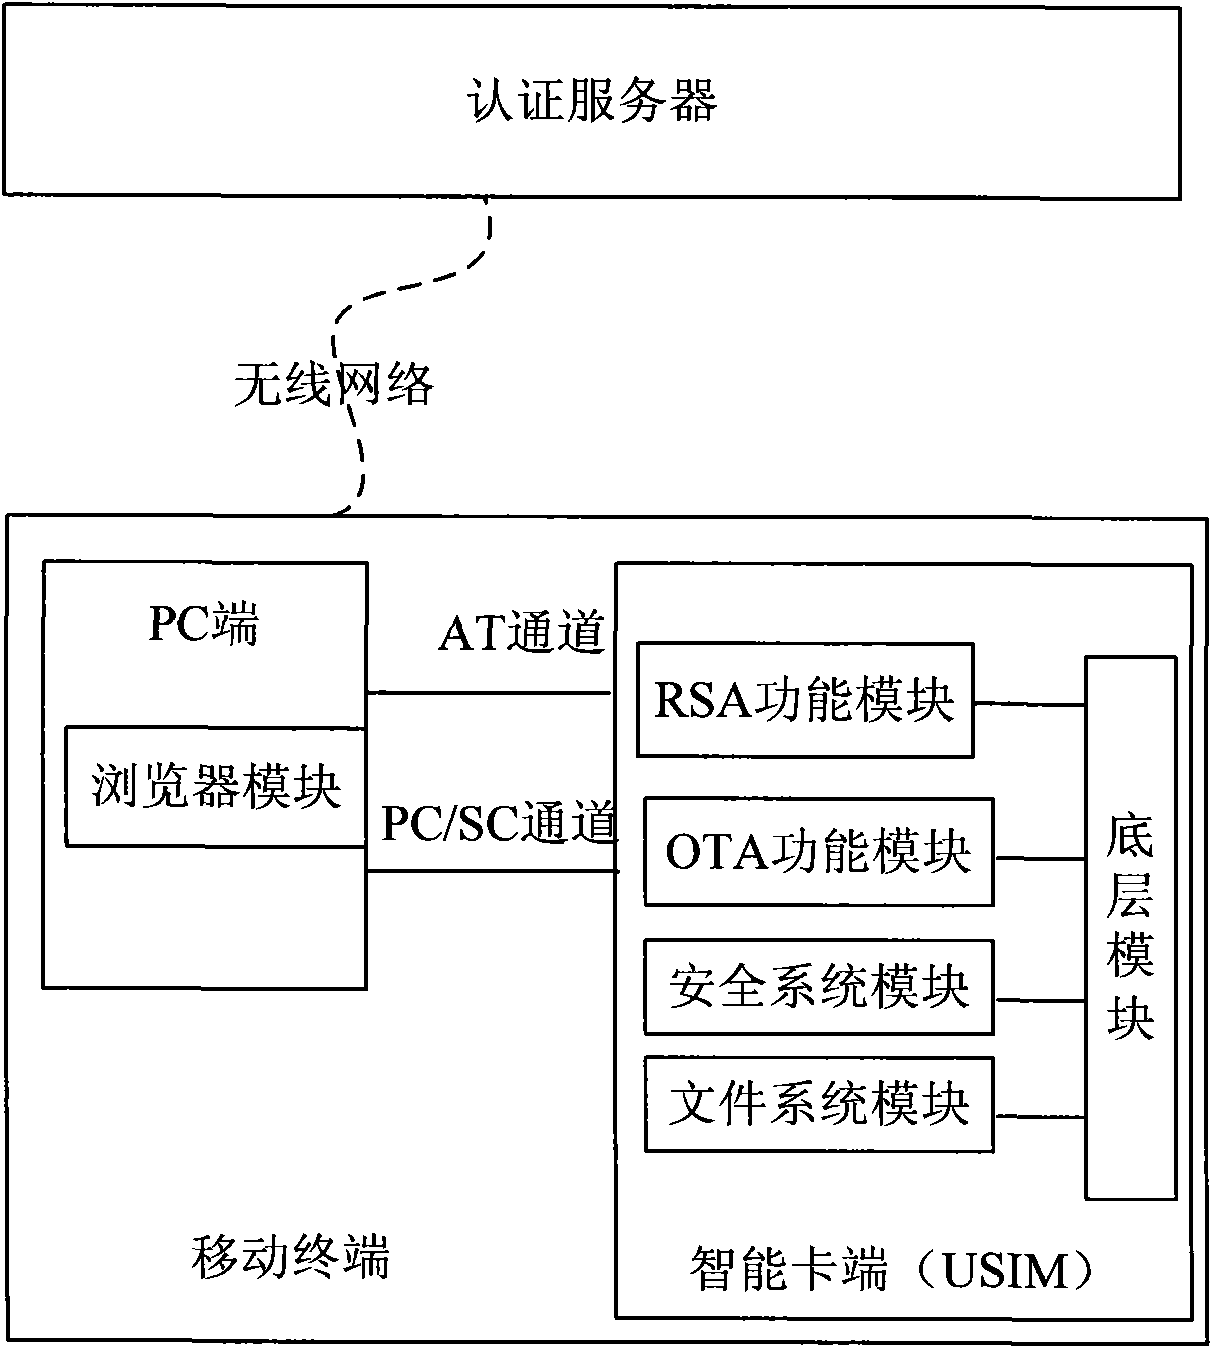 Mobile terminal signature-based remote payment system and method